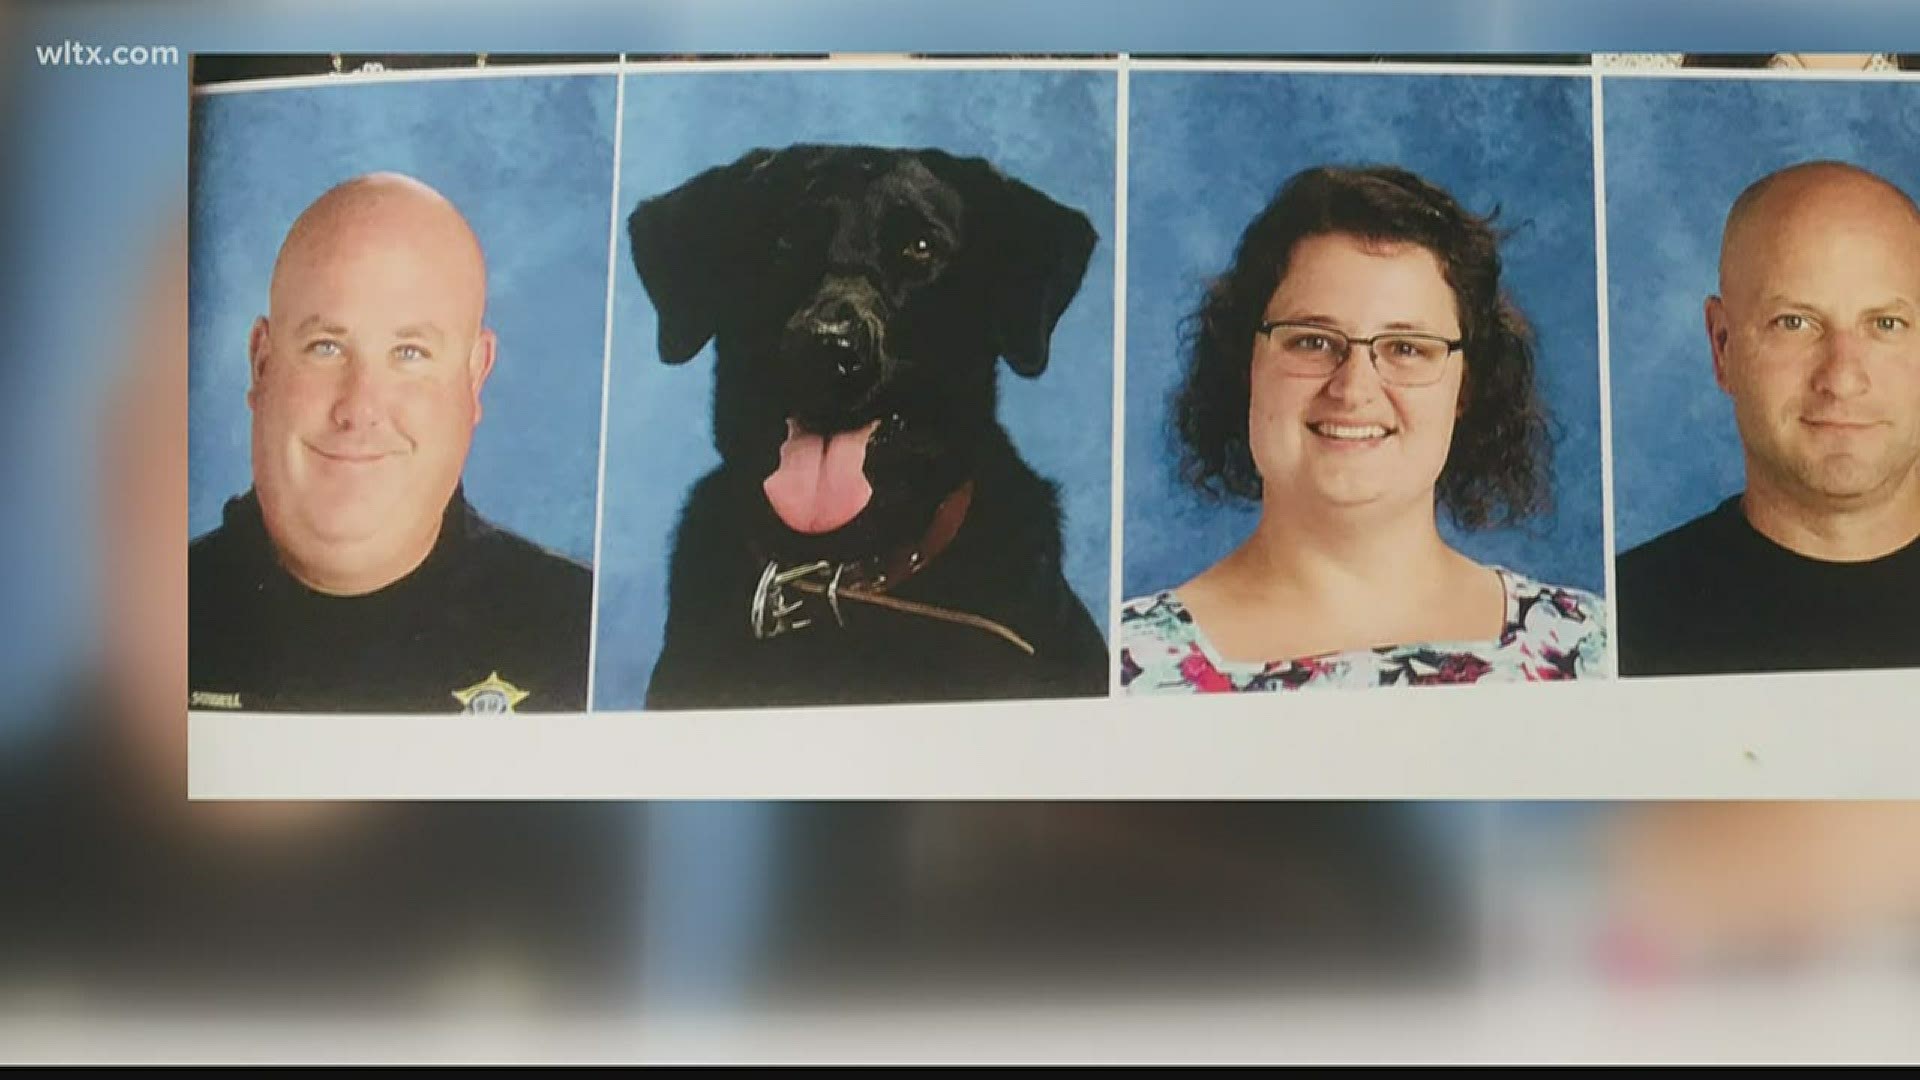 Deputy Billy Sowell and his K-9, Koda, made it into the North Central High School yearbook.